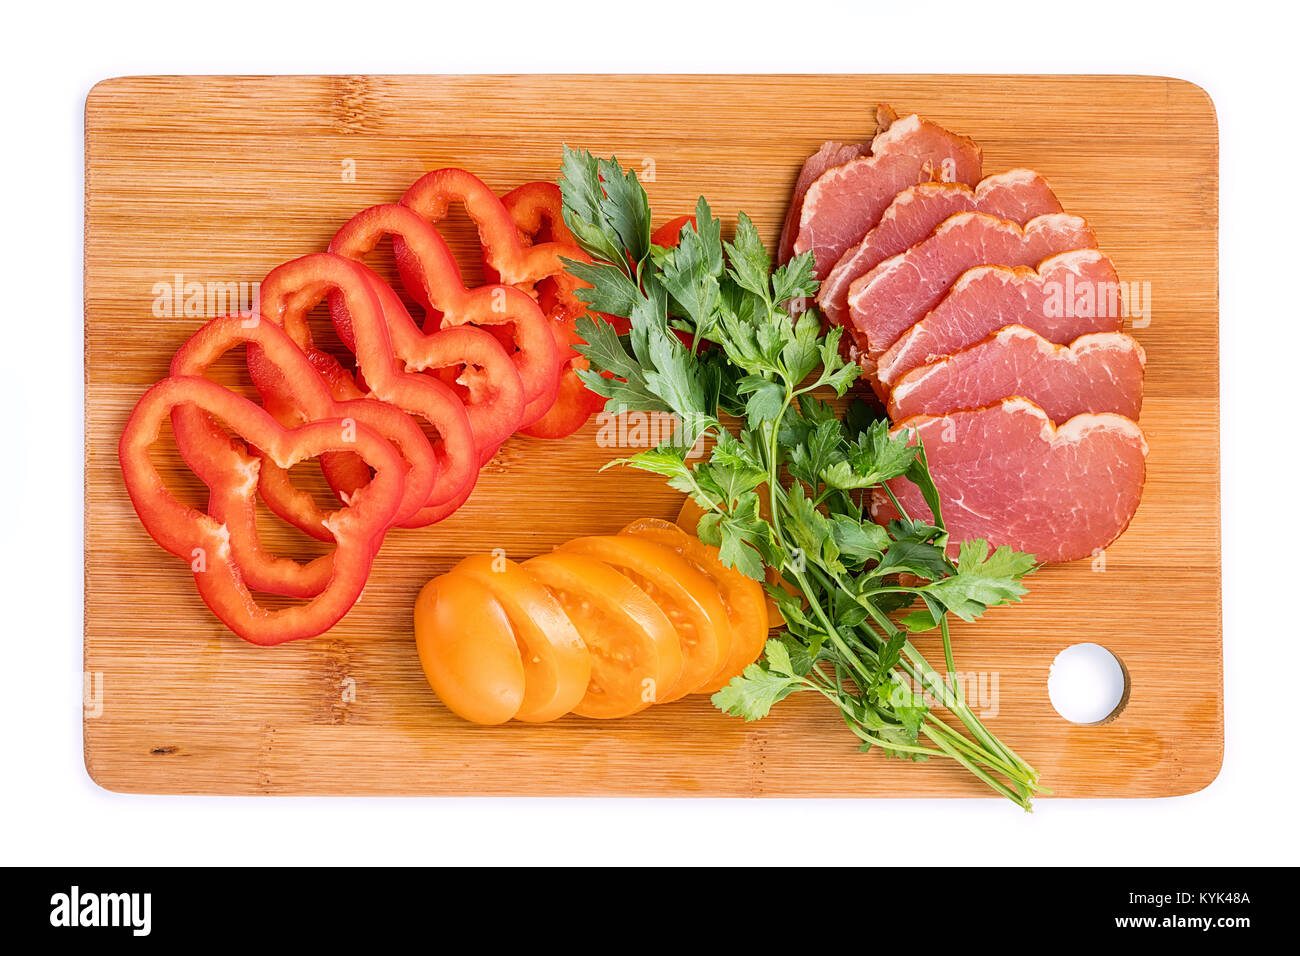 Raw food on the cutting board top view. Tomatoes, peppers, meat and greens on a wooden board. Isolated on white Stock Photo